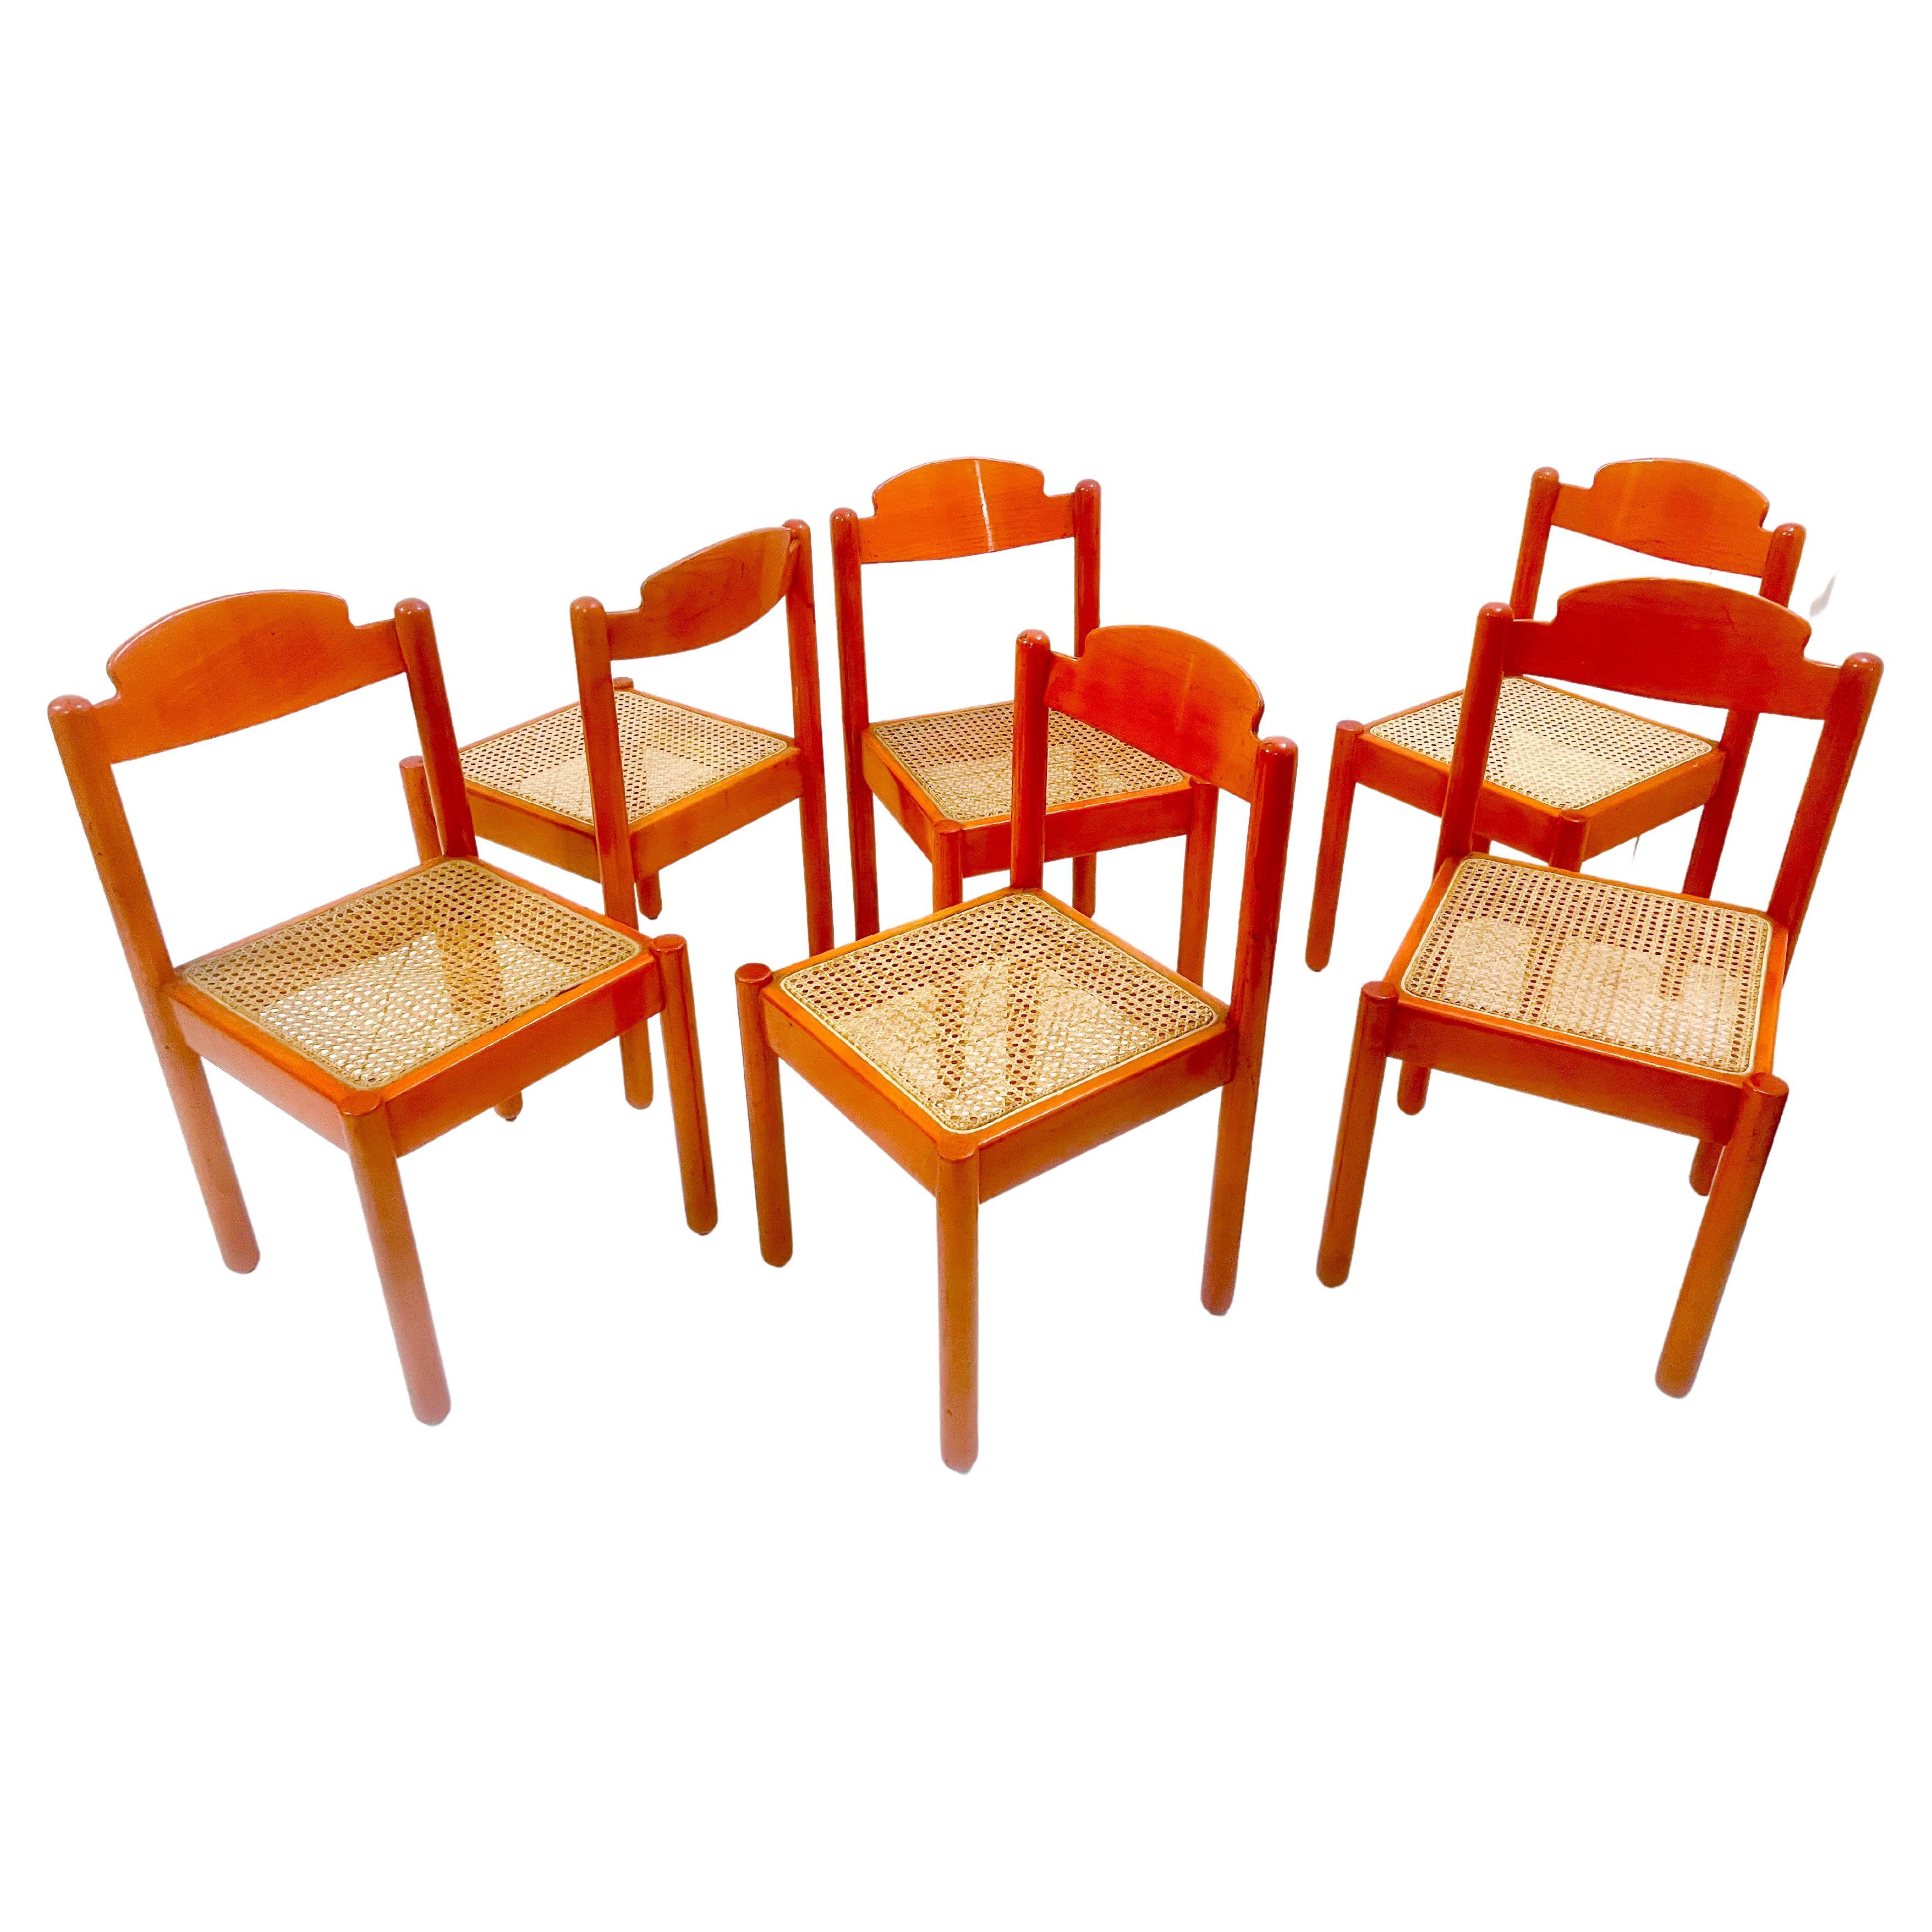 Mid-Century Modern Set of 6 Orange Chairs, Wood, Italy, 1960s For Sale